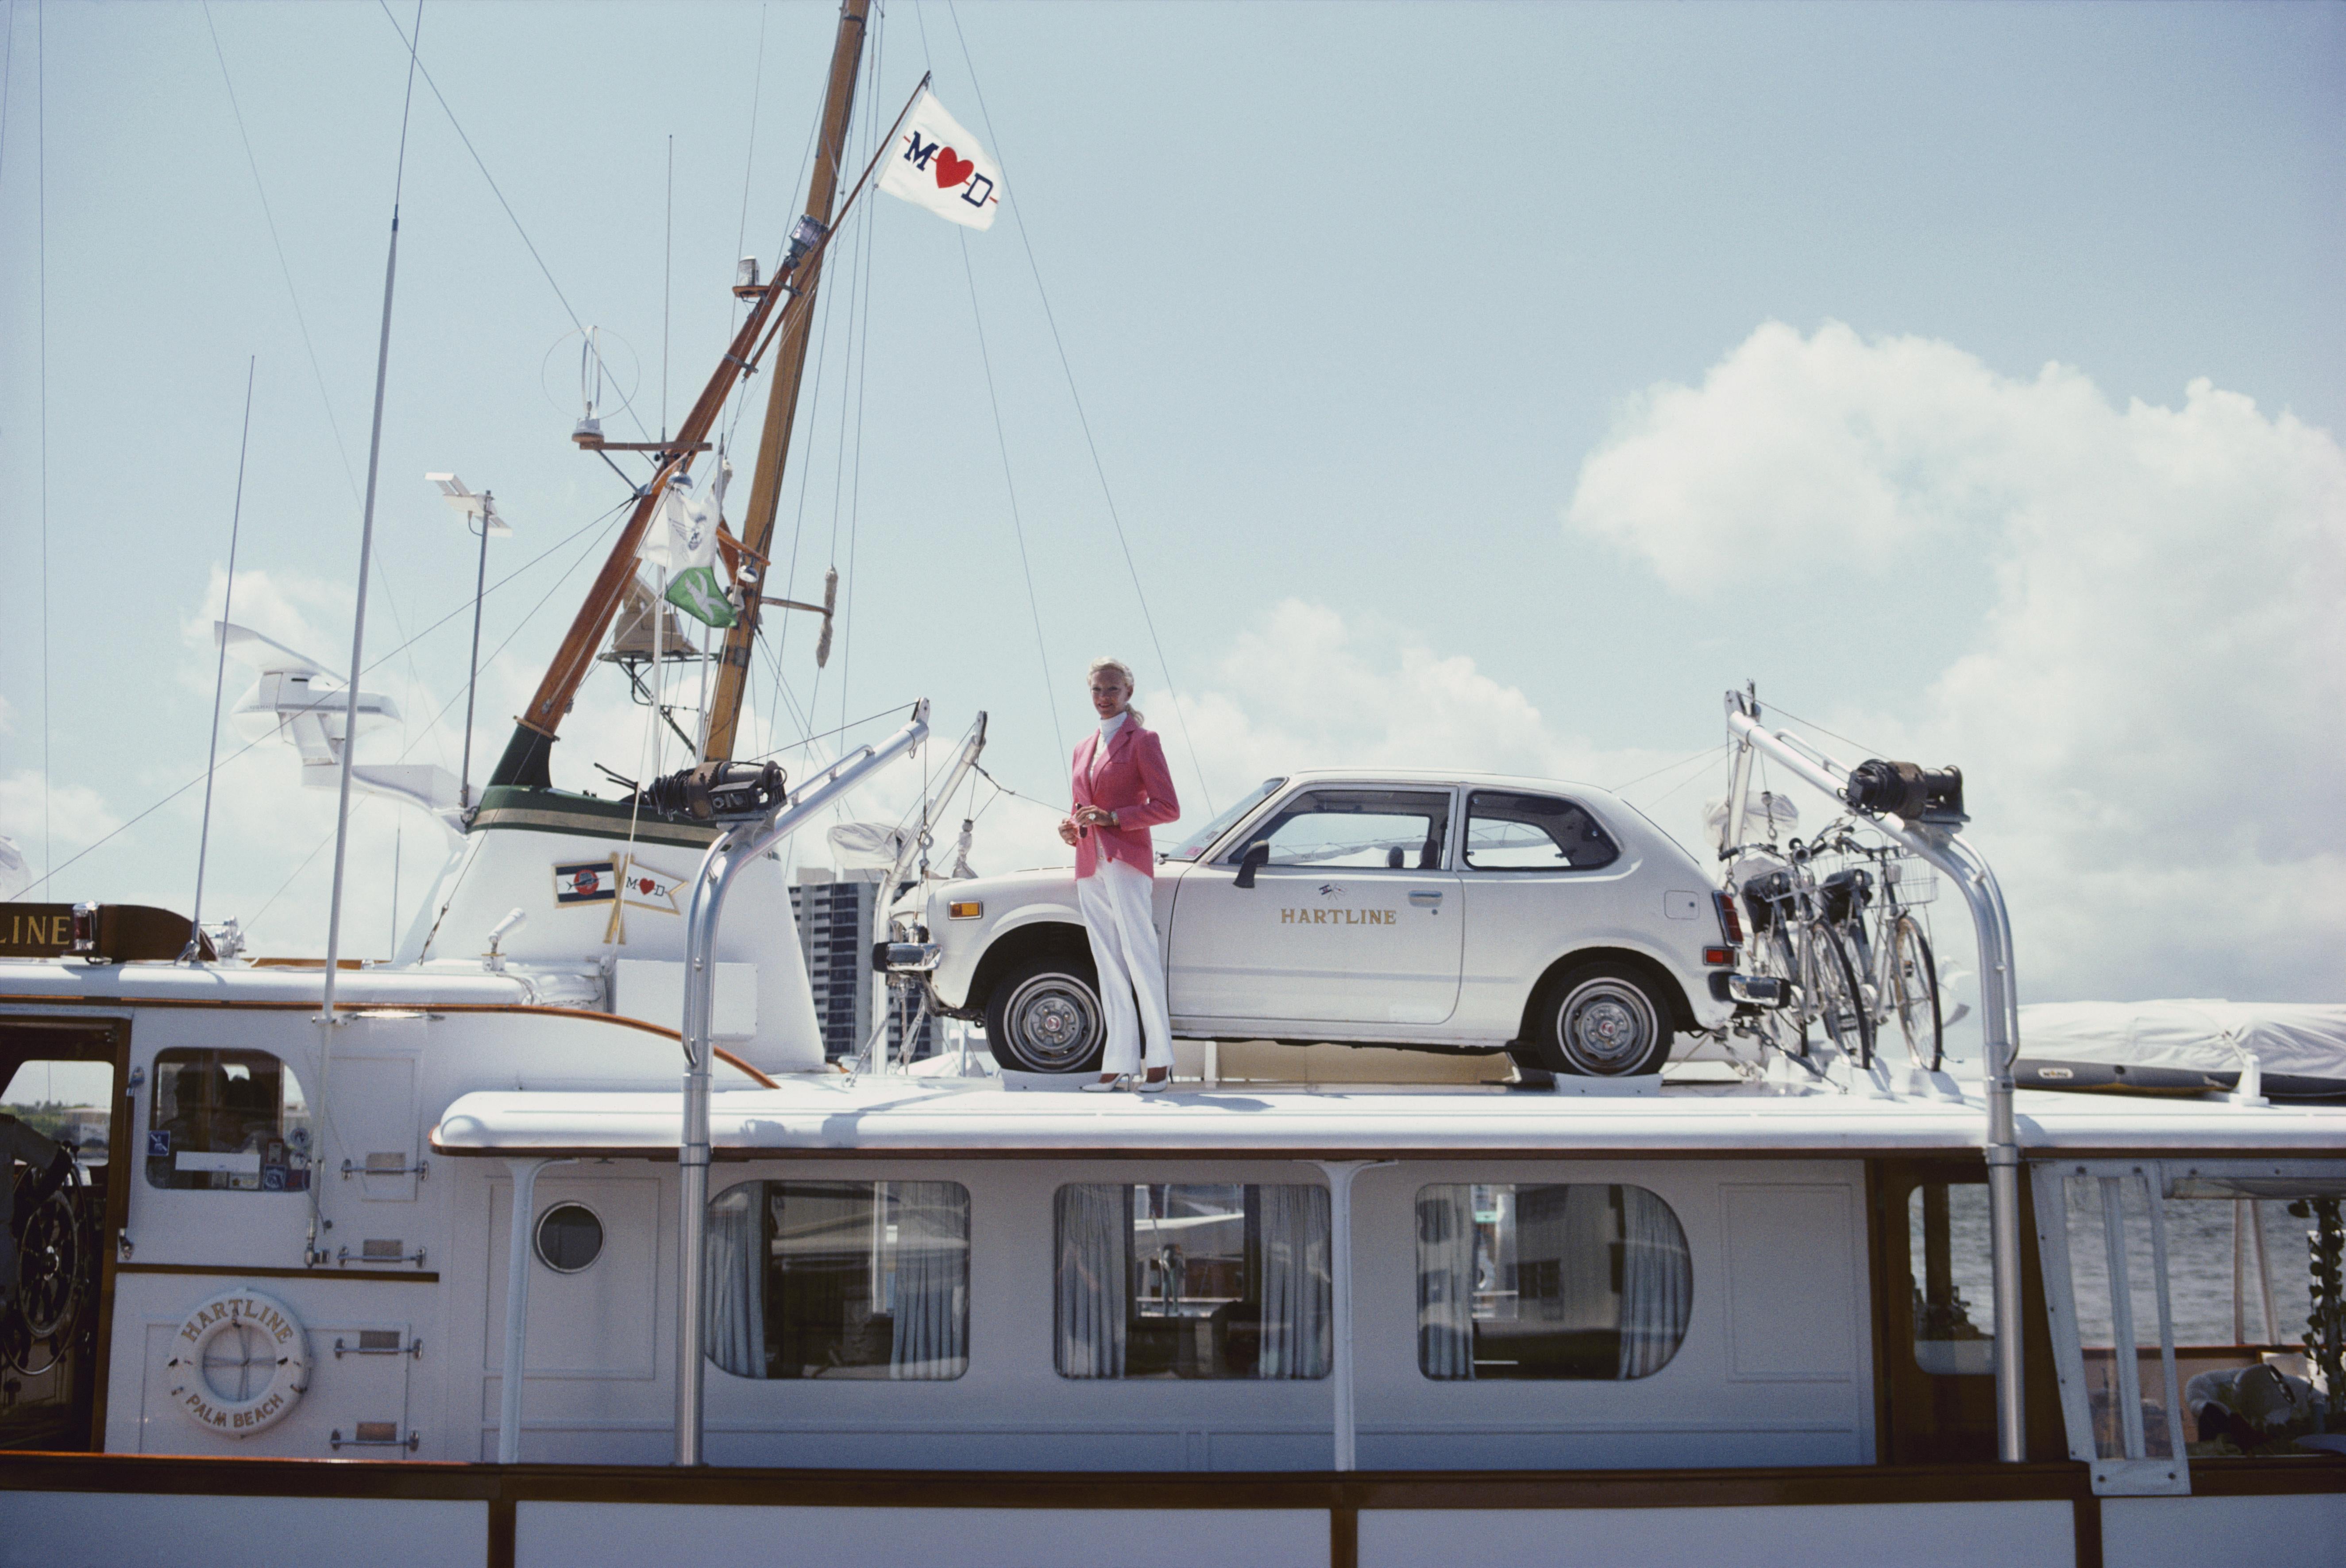 'No Transport Problems' 1980 Slim Aarons Limited Estate Edition
Mrs. Woolworth Donahue with car and bicycles on her motor yacht, ‘Hartline’. 

Slim Aarons Chromogenic C print 
Printed Later 
Slim Aarons Estate Edition 
Produced utilising the only